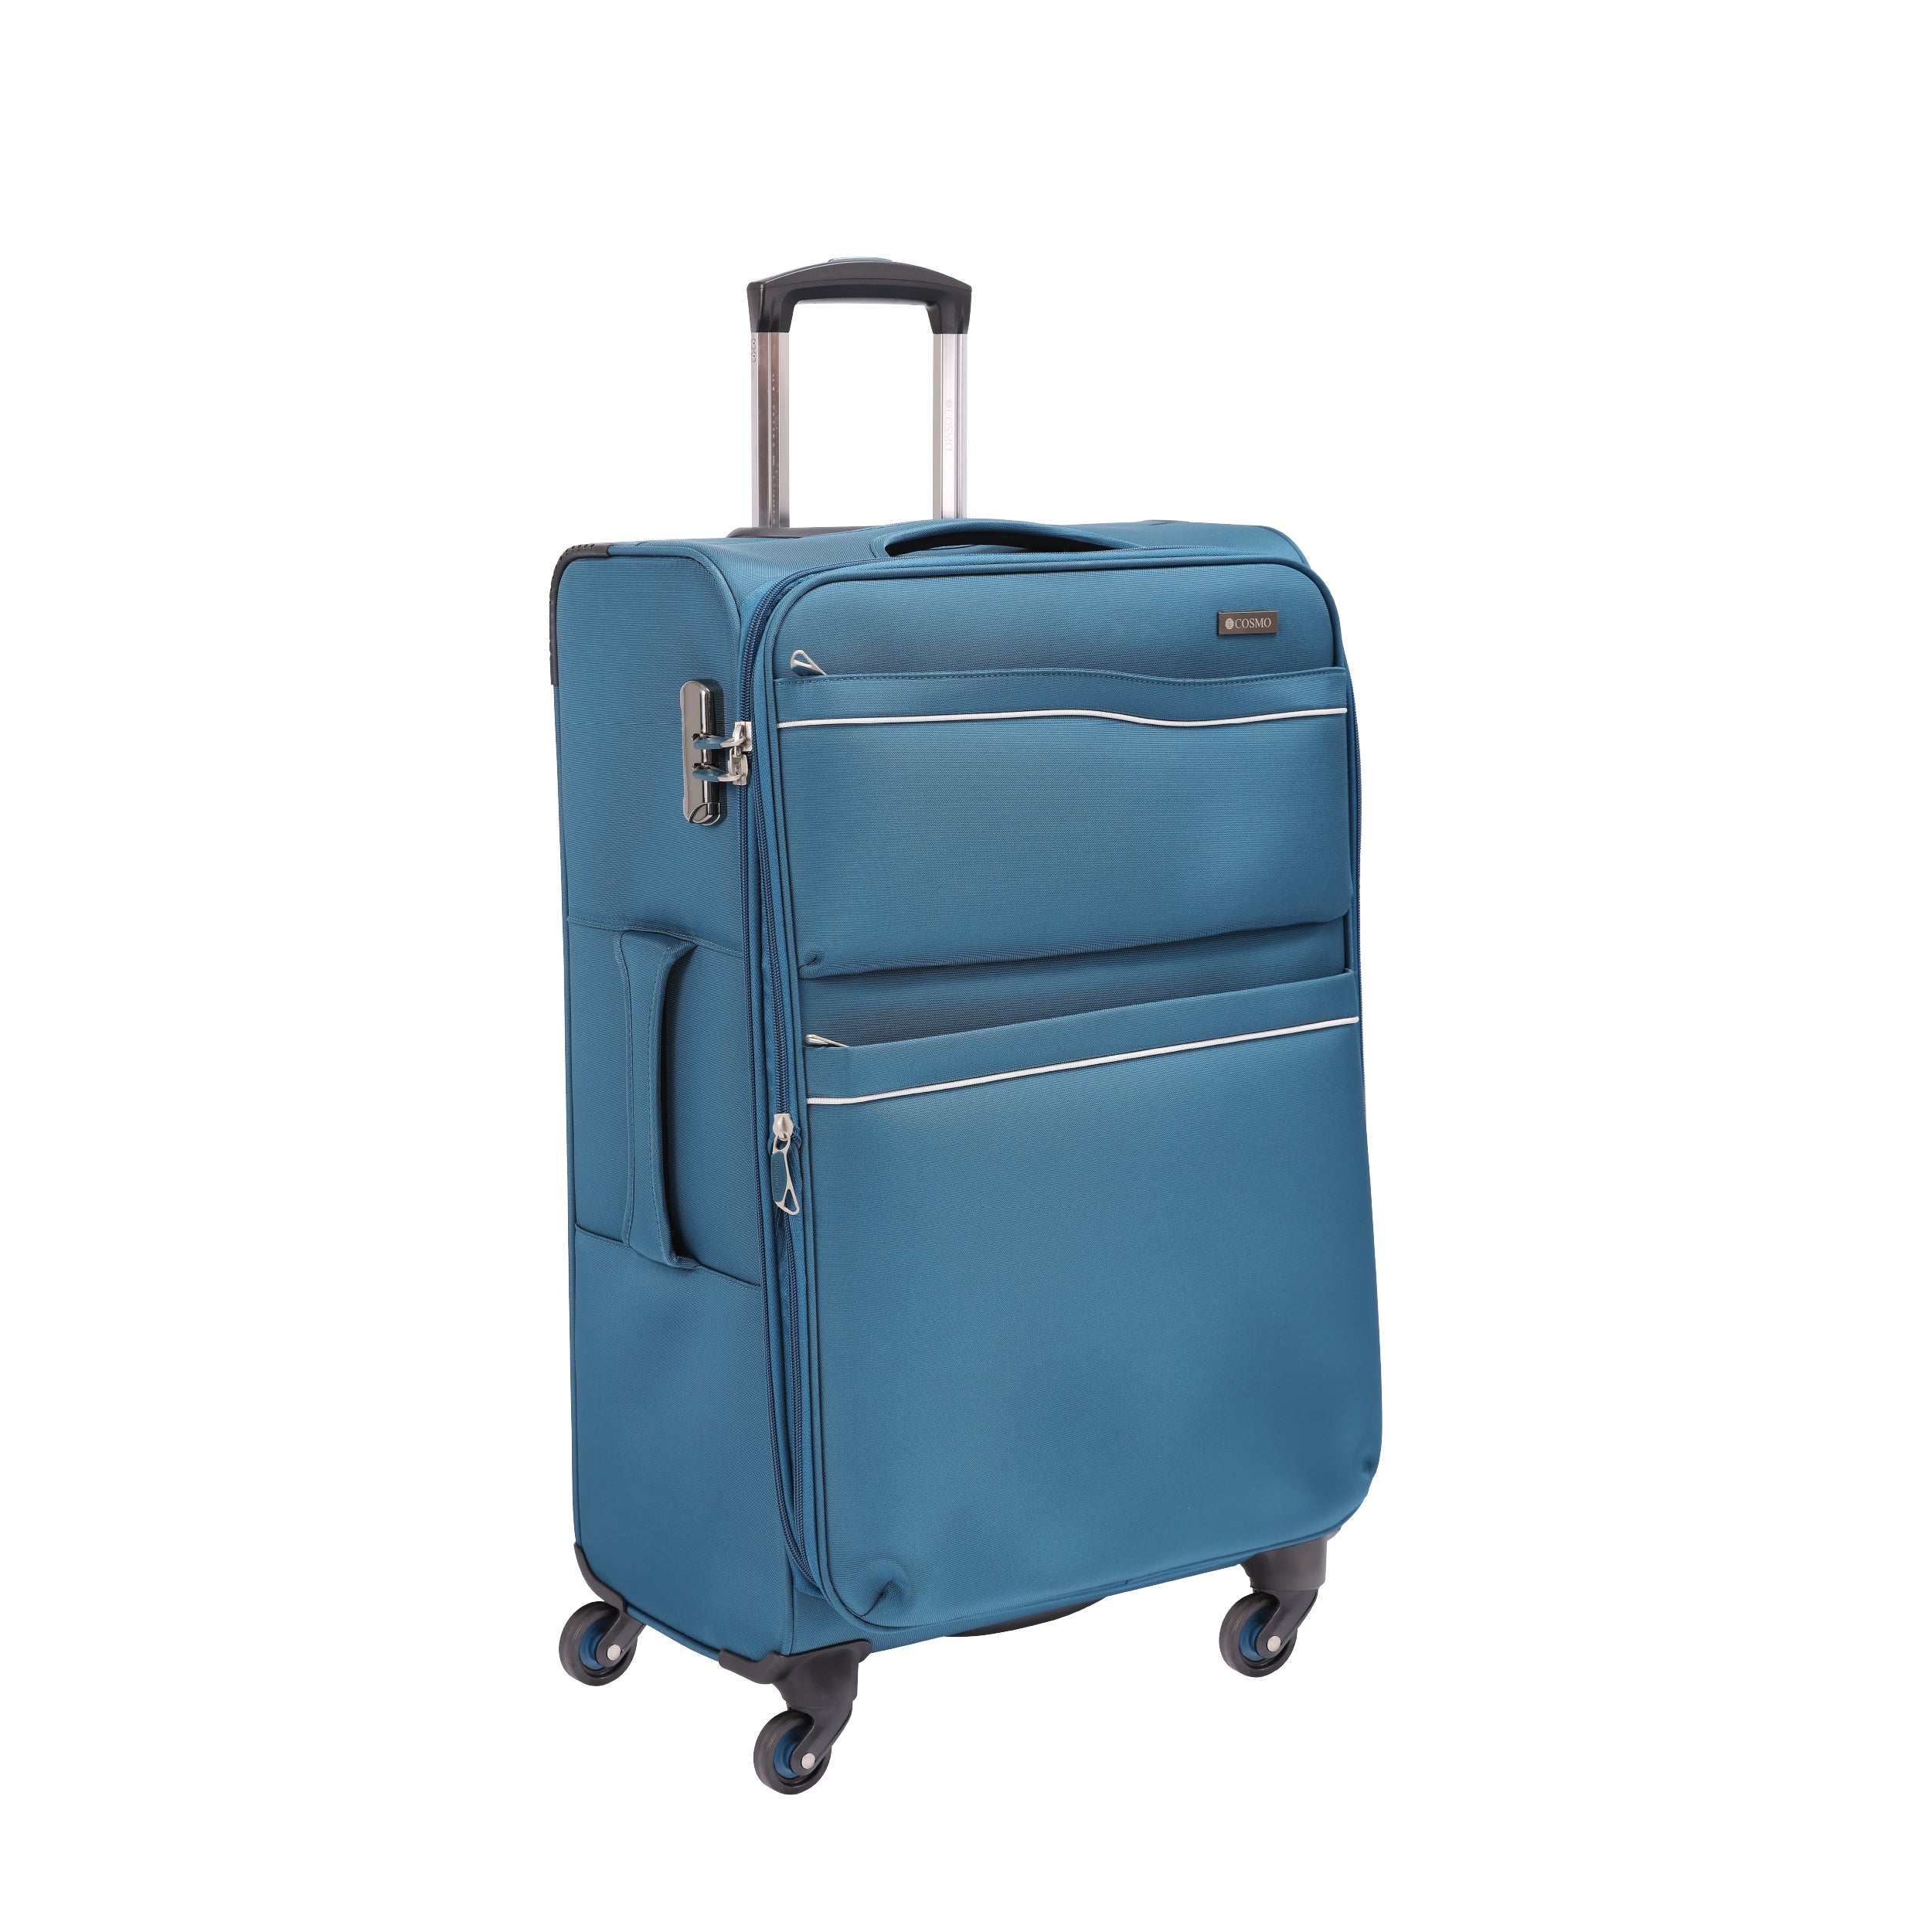 Samsonite Nuon 75 cm Expandable Spinner Luggage by Samsonite Luggage (Nuon- 75cm-Case)